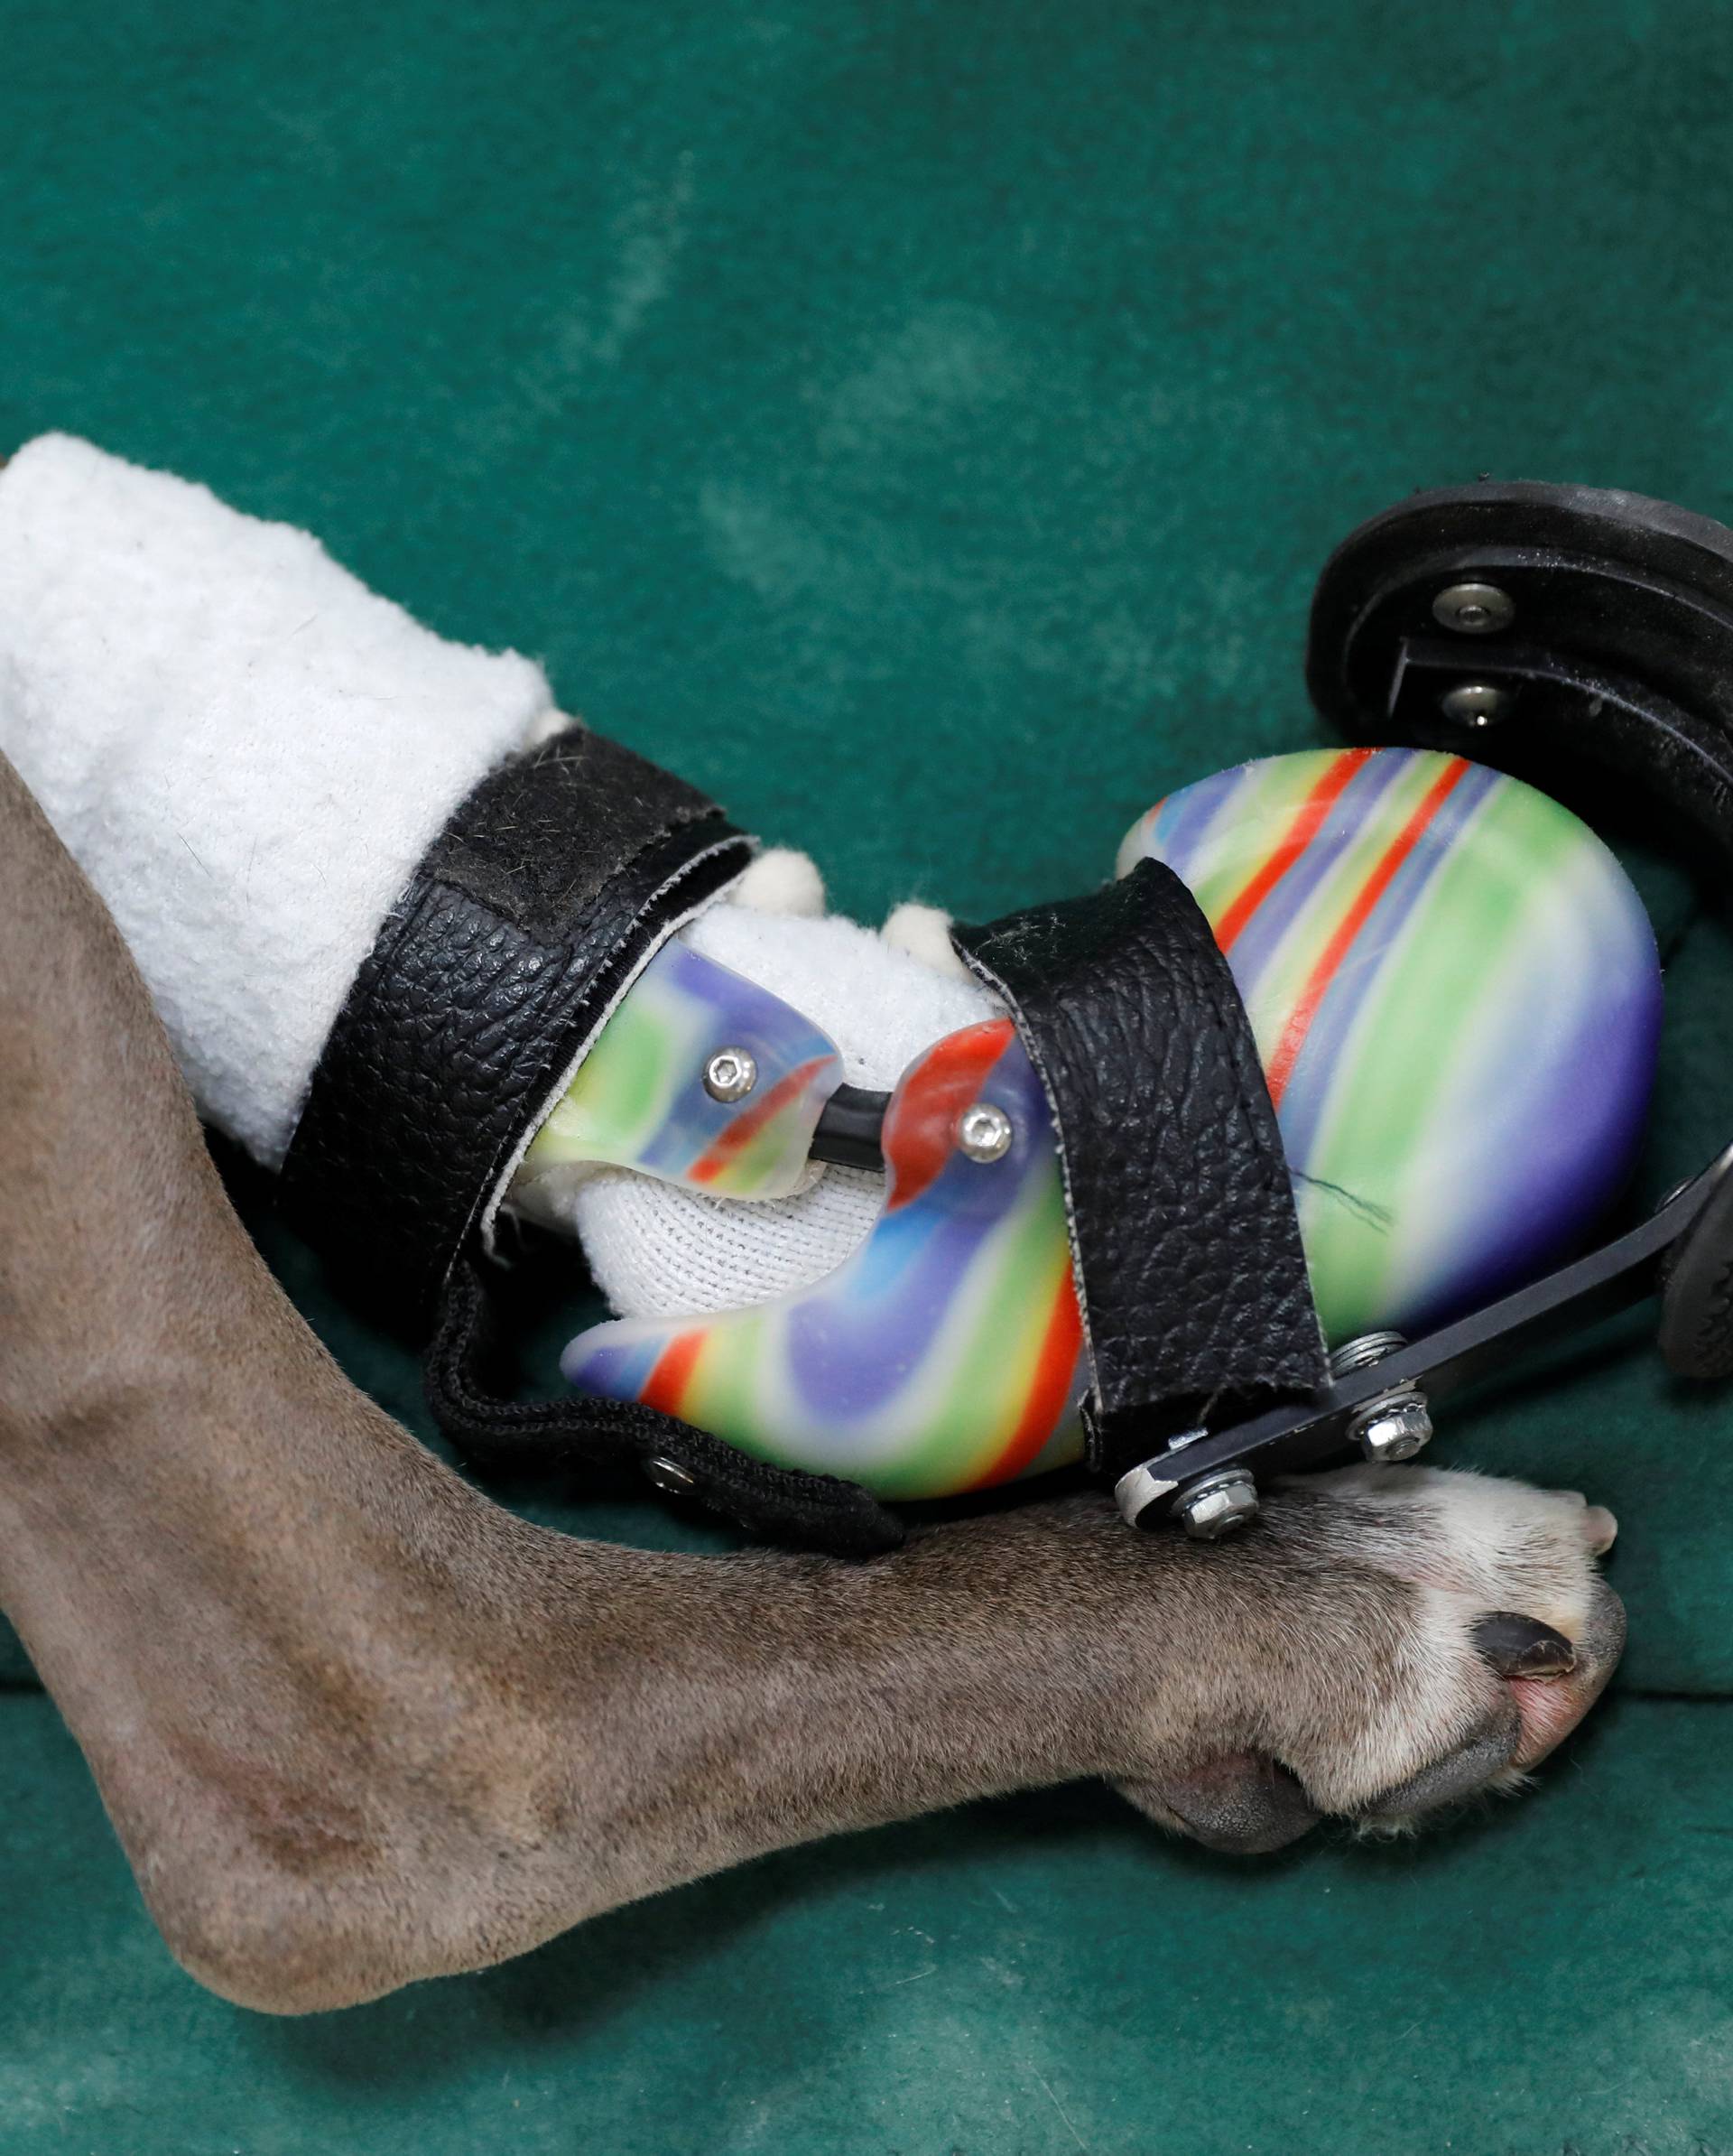 Pitbull mix wears a prosthetic paw in Sterling, Virginia